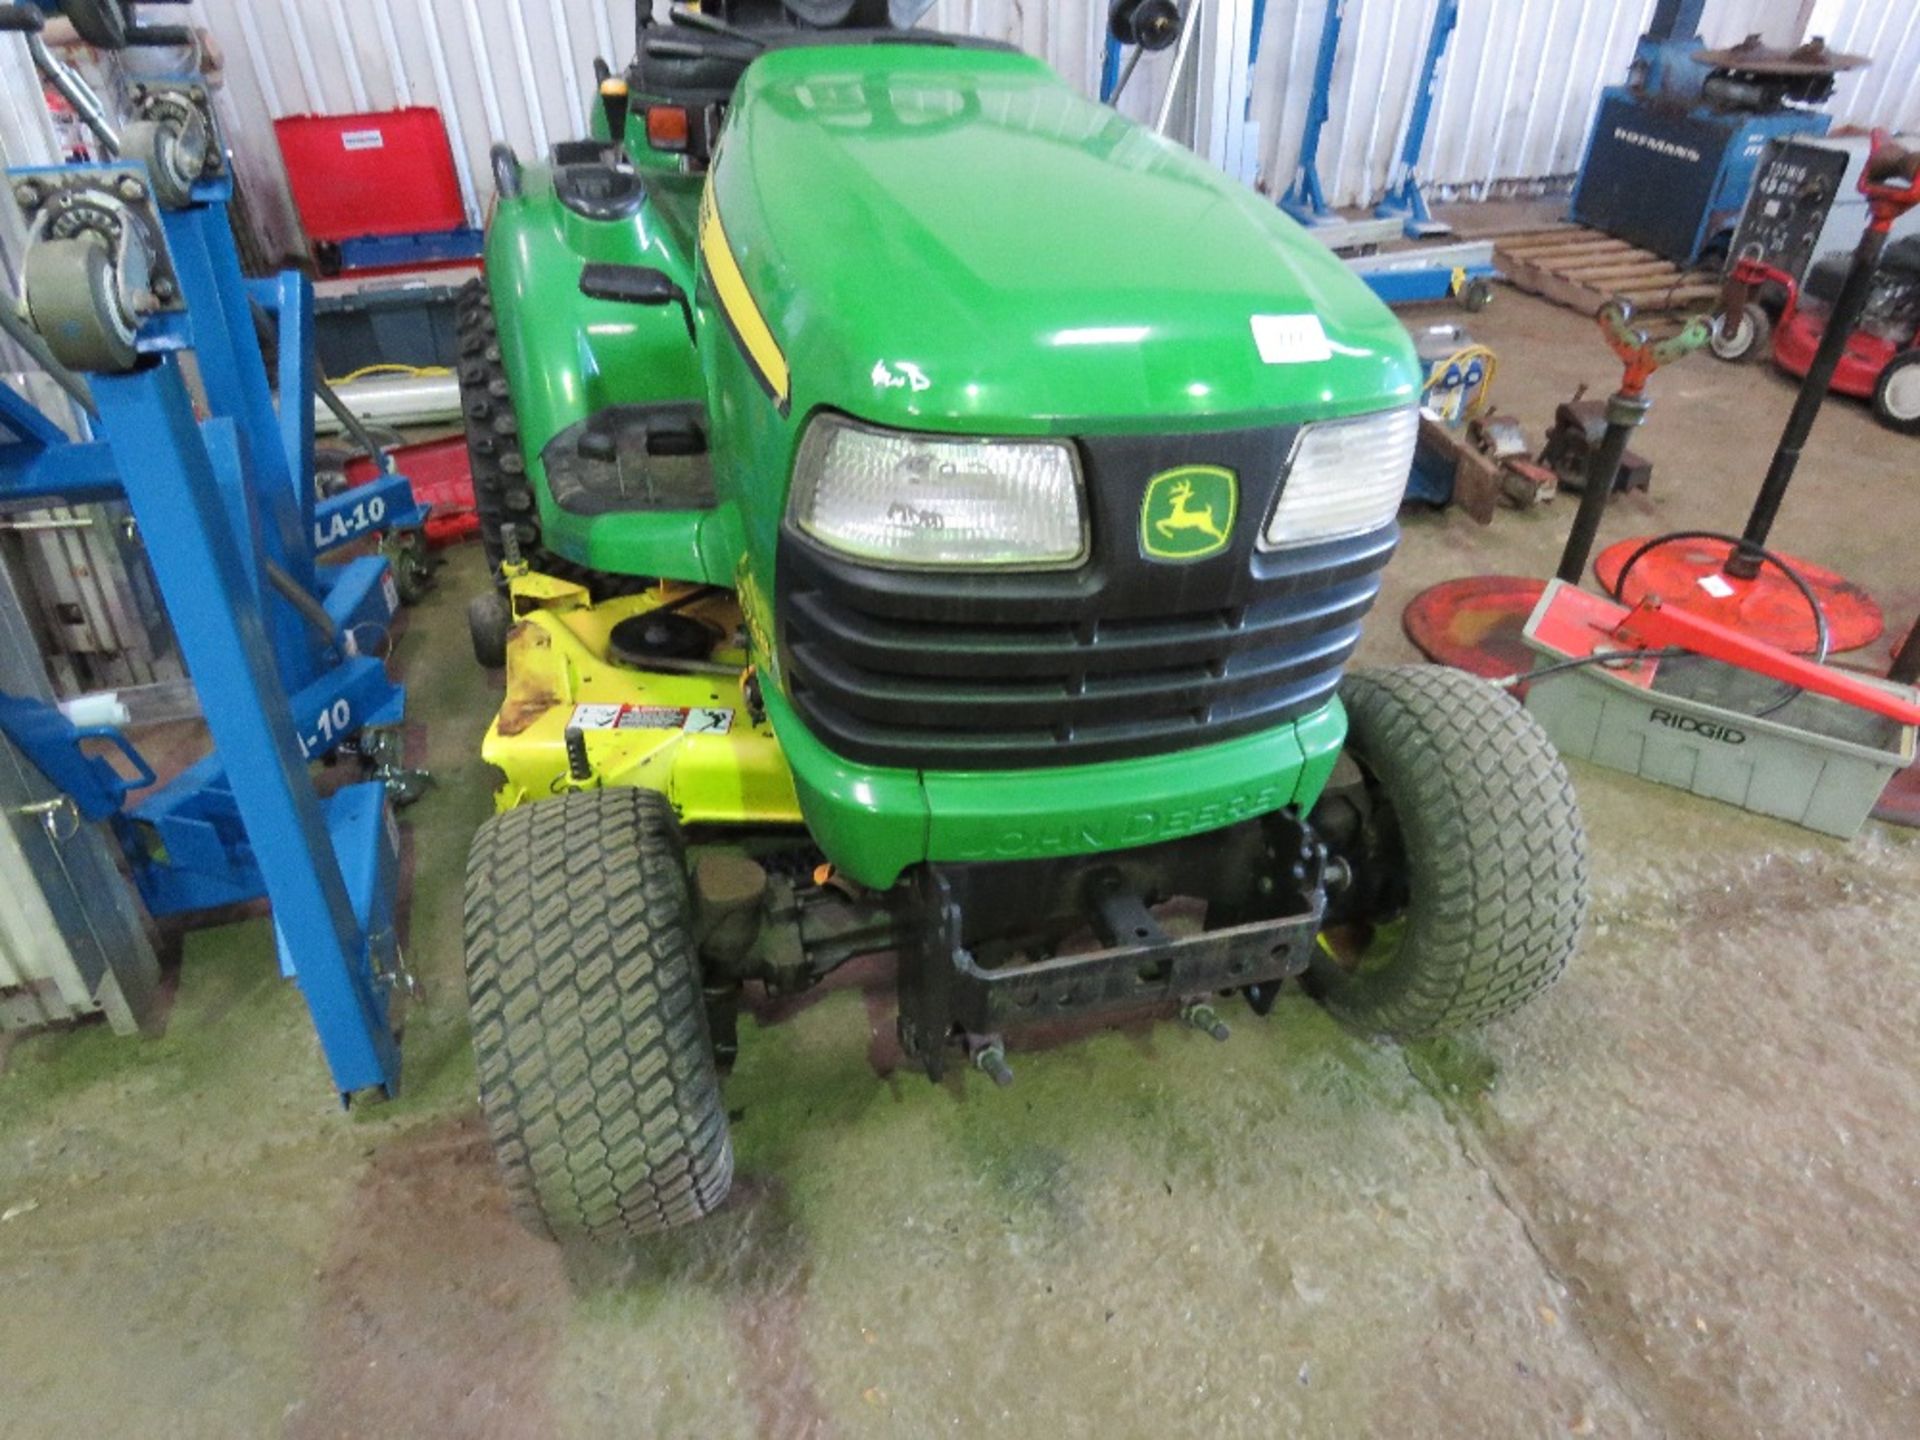 JOHN DEERE X748 4WD RIDE ON MOWER. WHEN TESTED WAS SEEN TO RUN, DRIVE, STEER AND MOWERS TURNED.